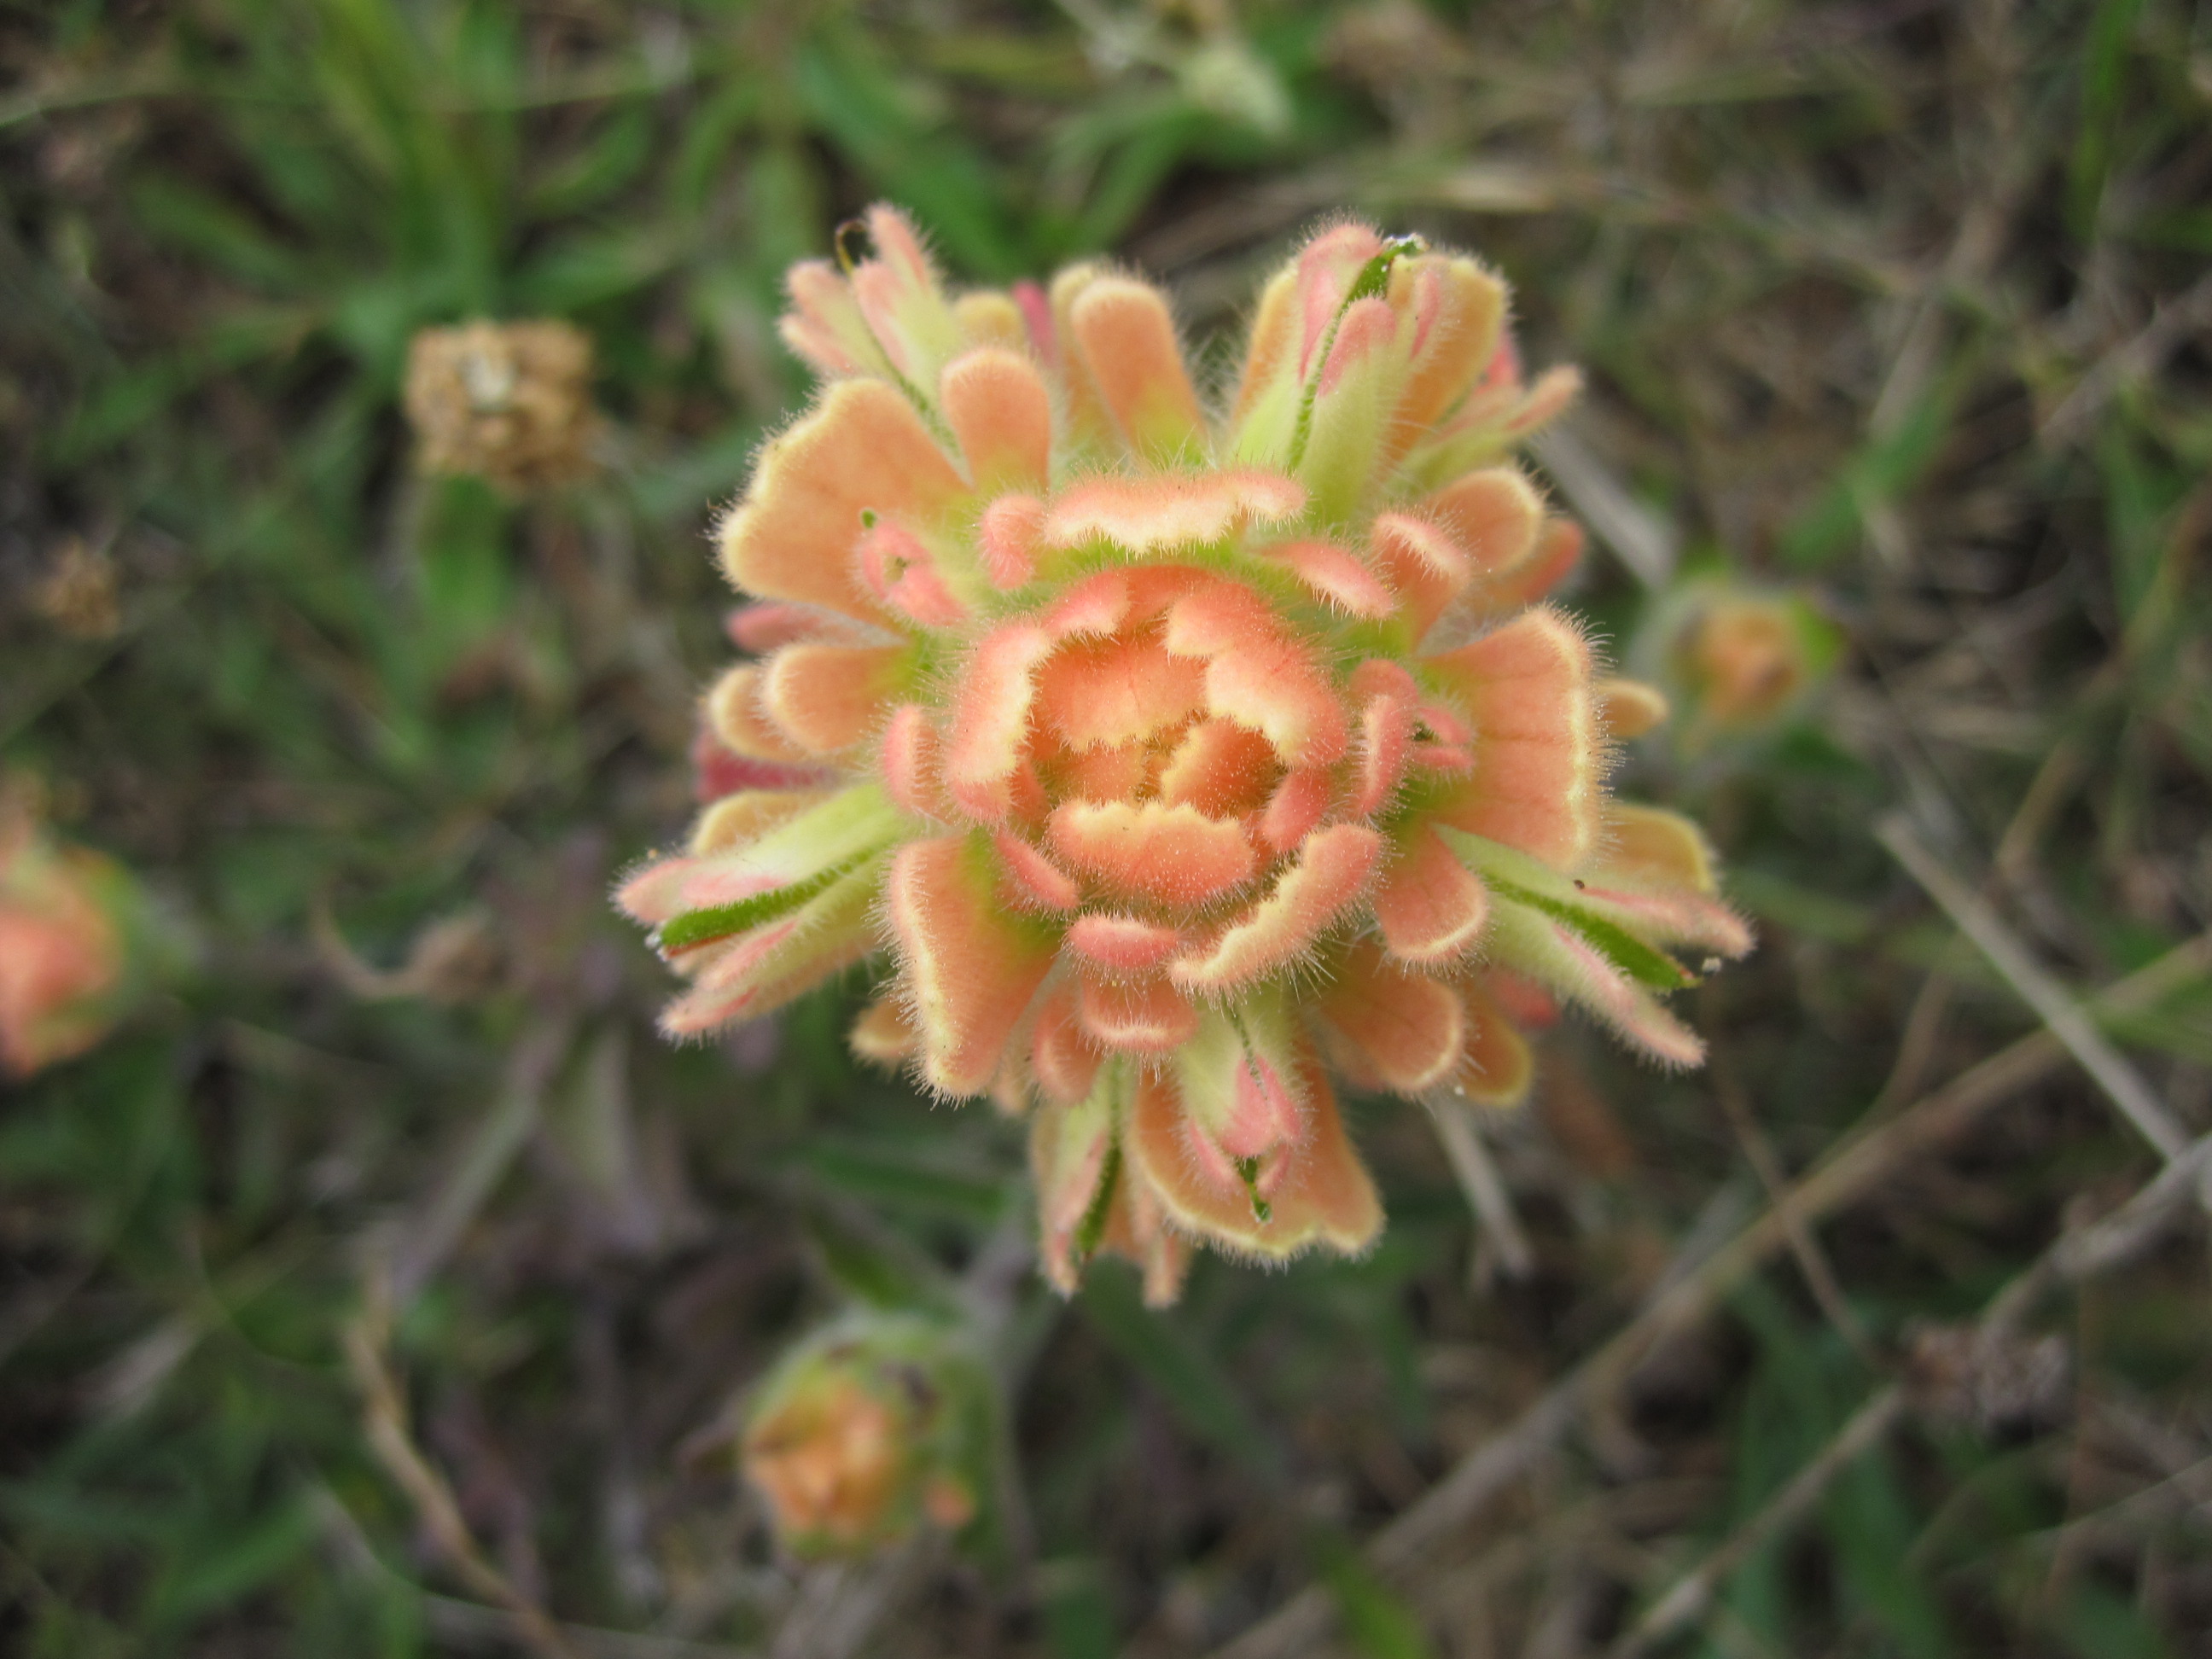 soft peach-colored bloom of an Indian Paintbrush